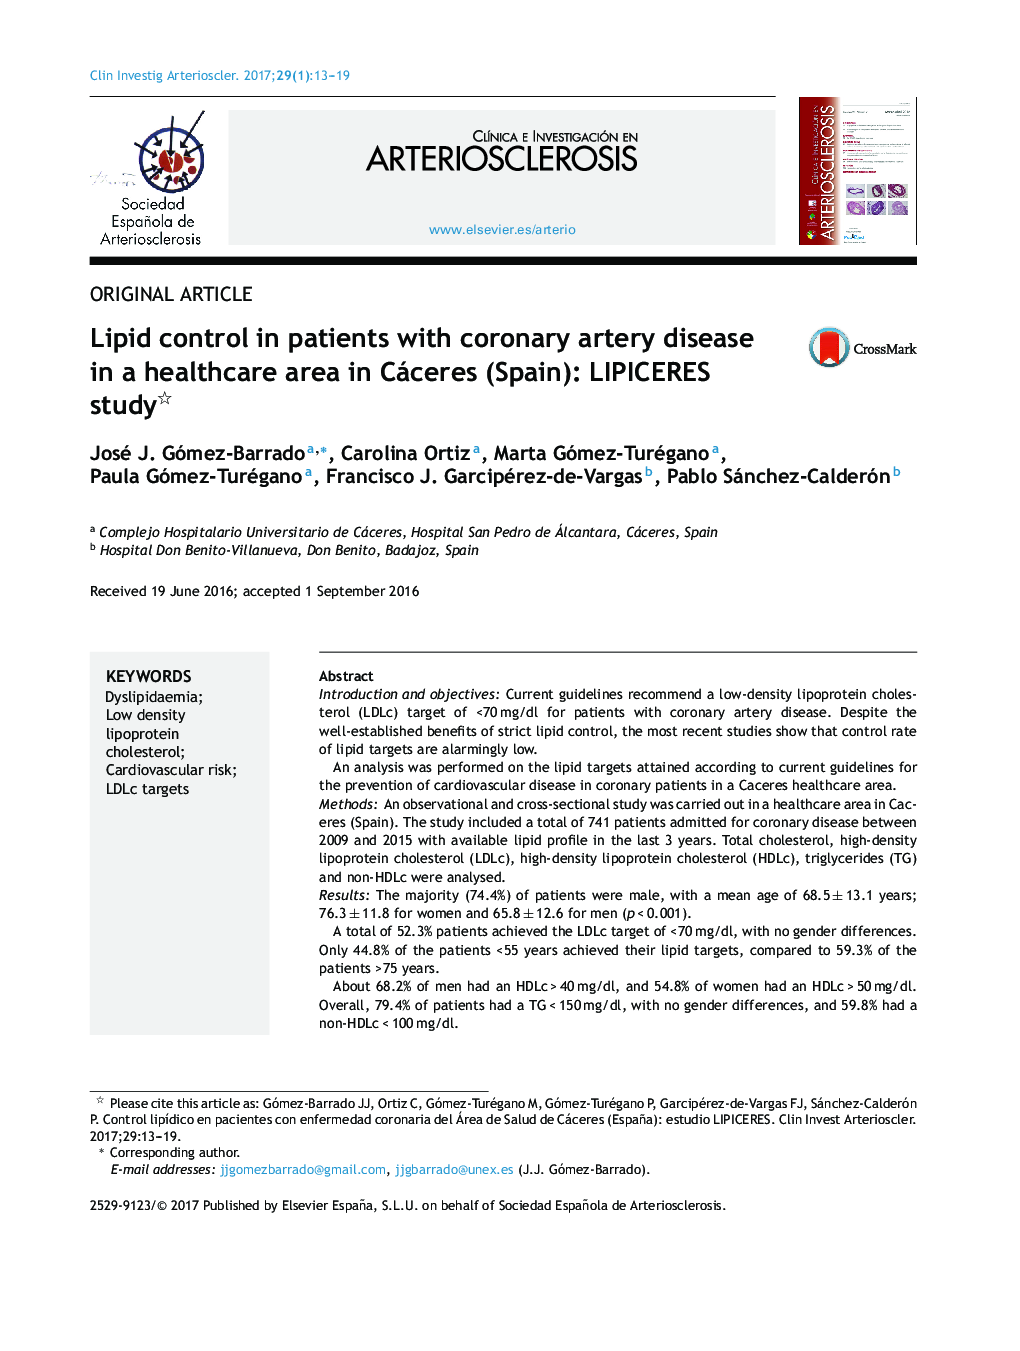 Lipid control in patients with coronary artery disease in a healthcare area in Cáceres (Spain): LIPICERES study